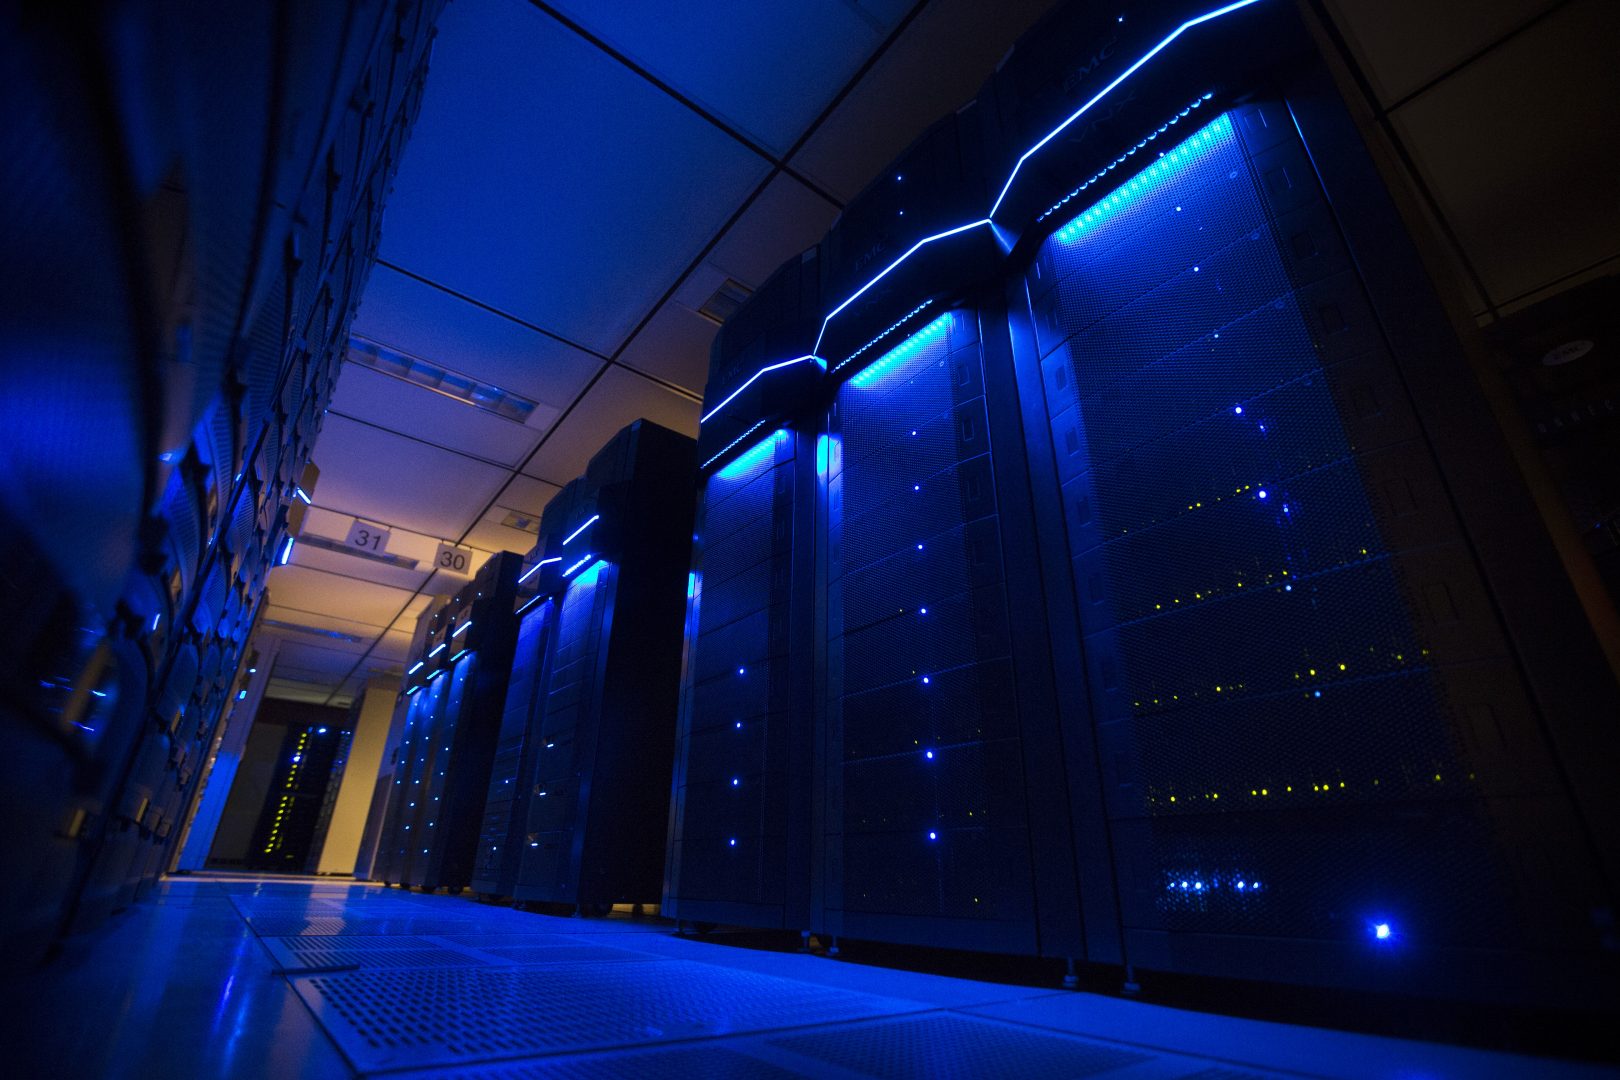 FILE PHOTO: This May 20, 2015 photo shows server banks inside a data center at AEP headquarters in Columbus, Ohio.